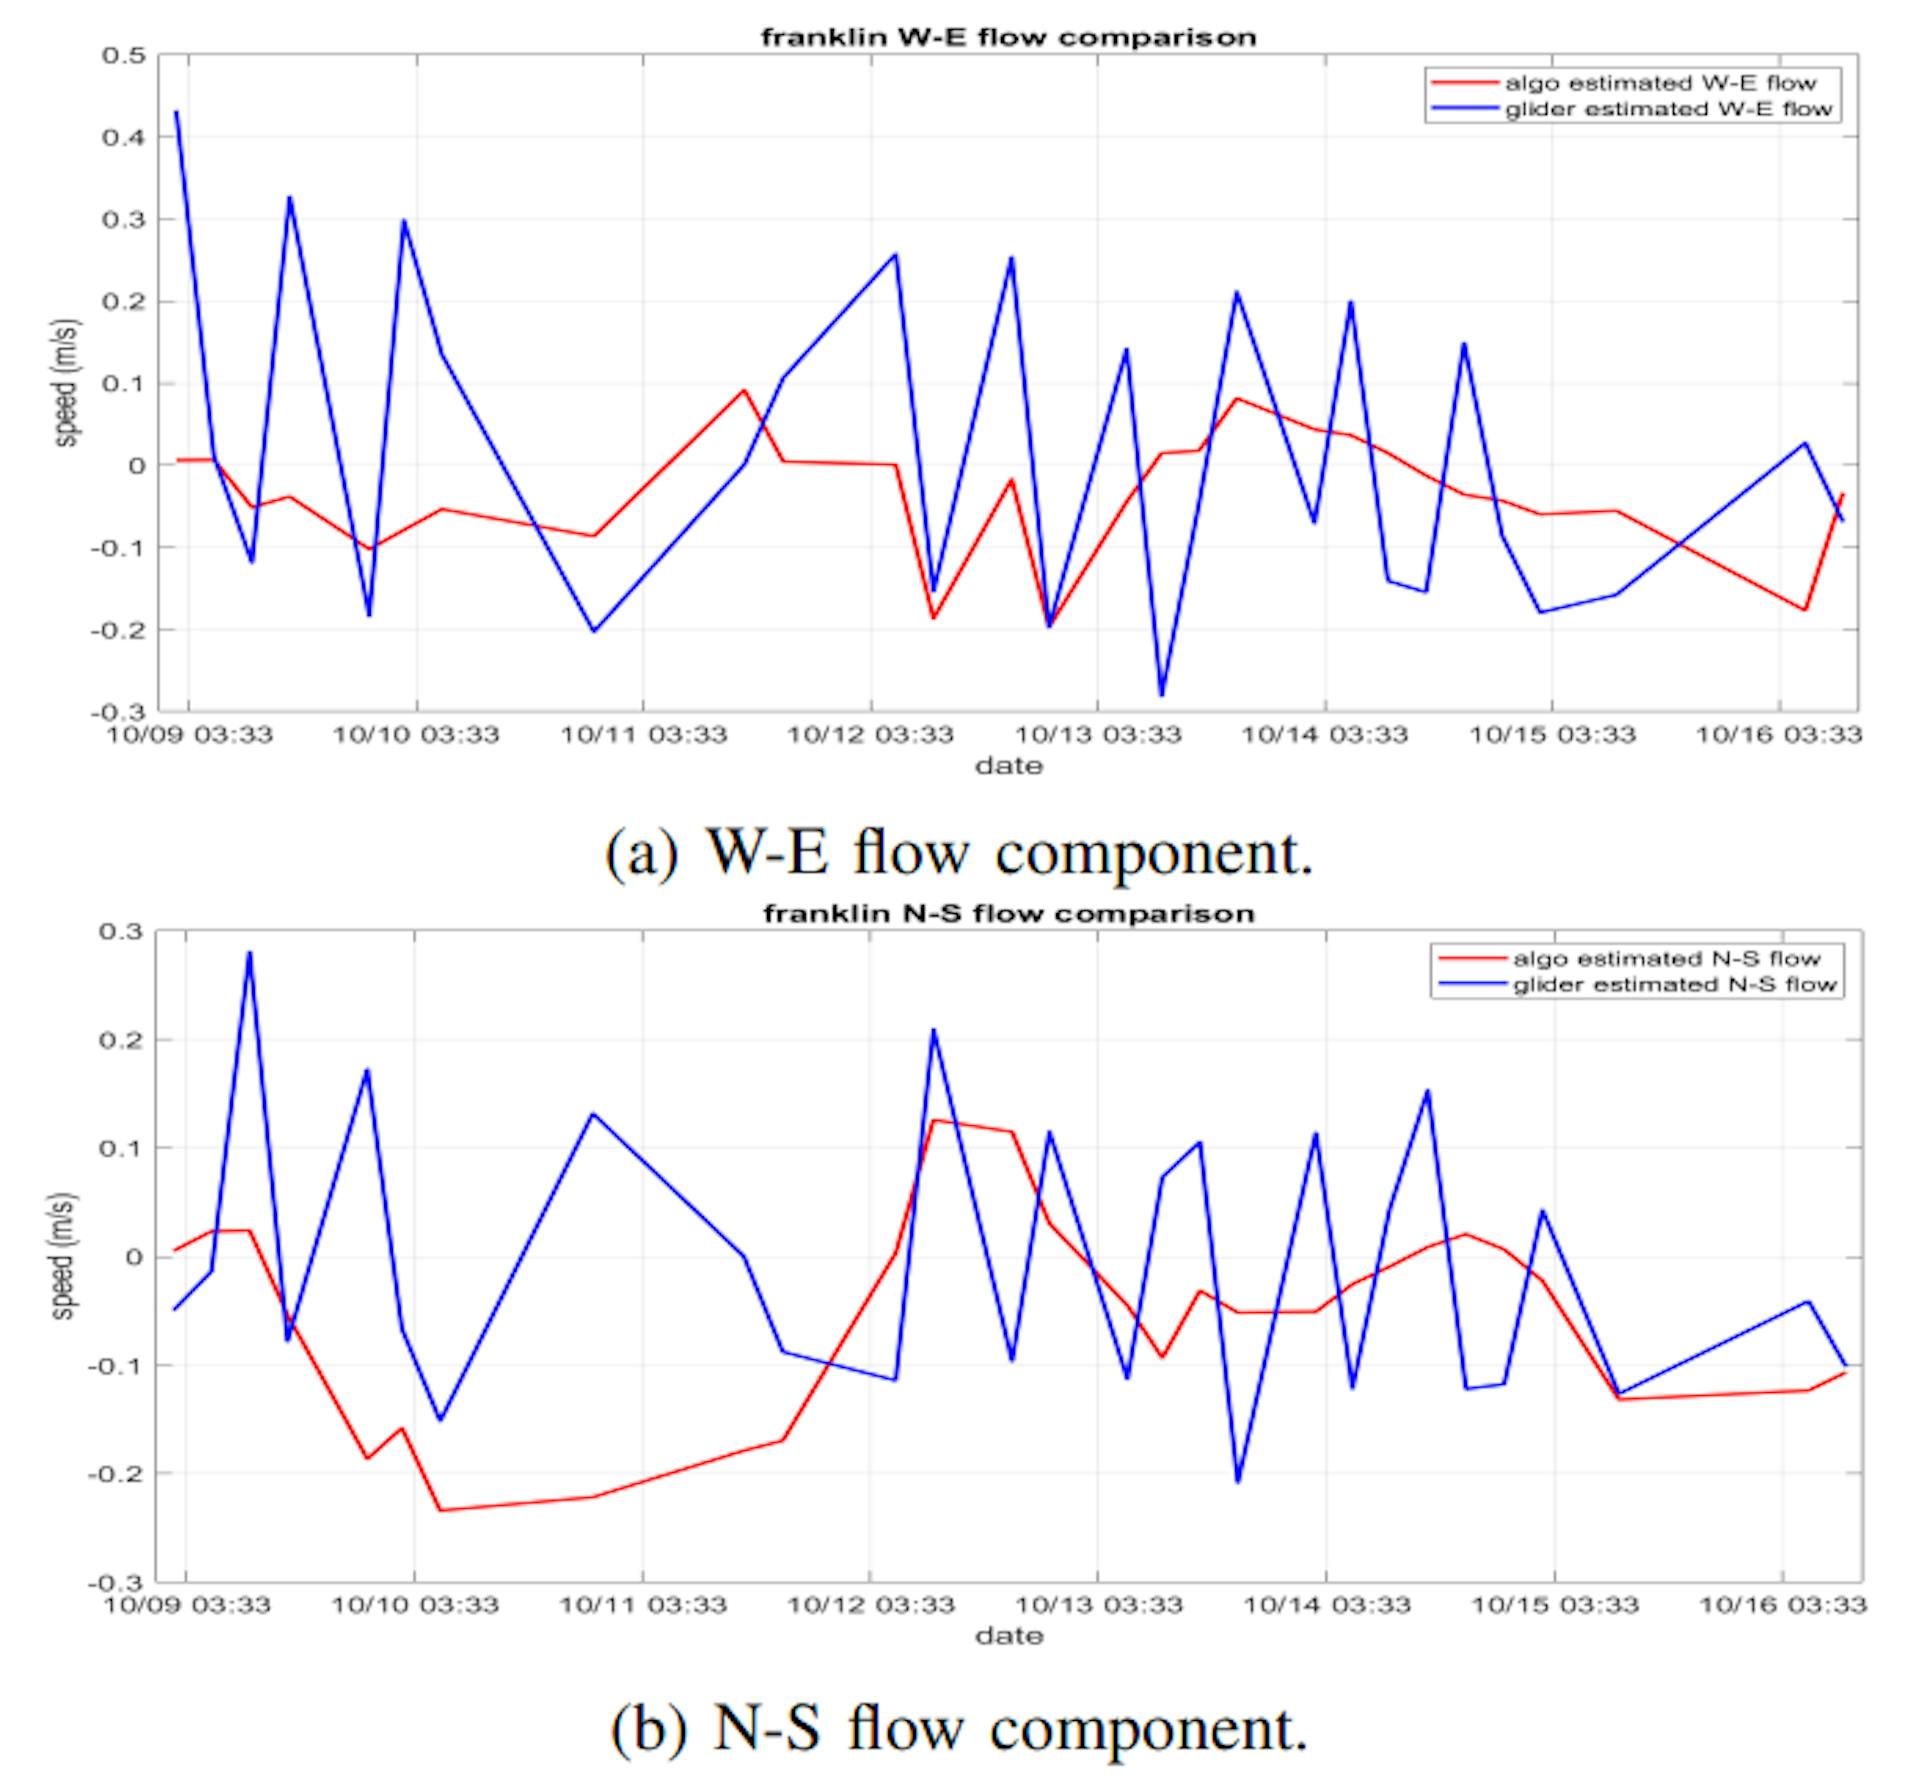 Fig. 6: Comparison of glider-estimated and algorithm-estimated W-E (u, upper) and N-S (v, lower) flow velocities for the 2022 Franklin deployment.